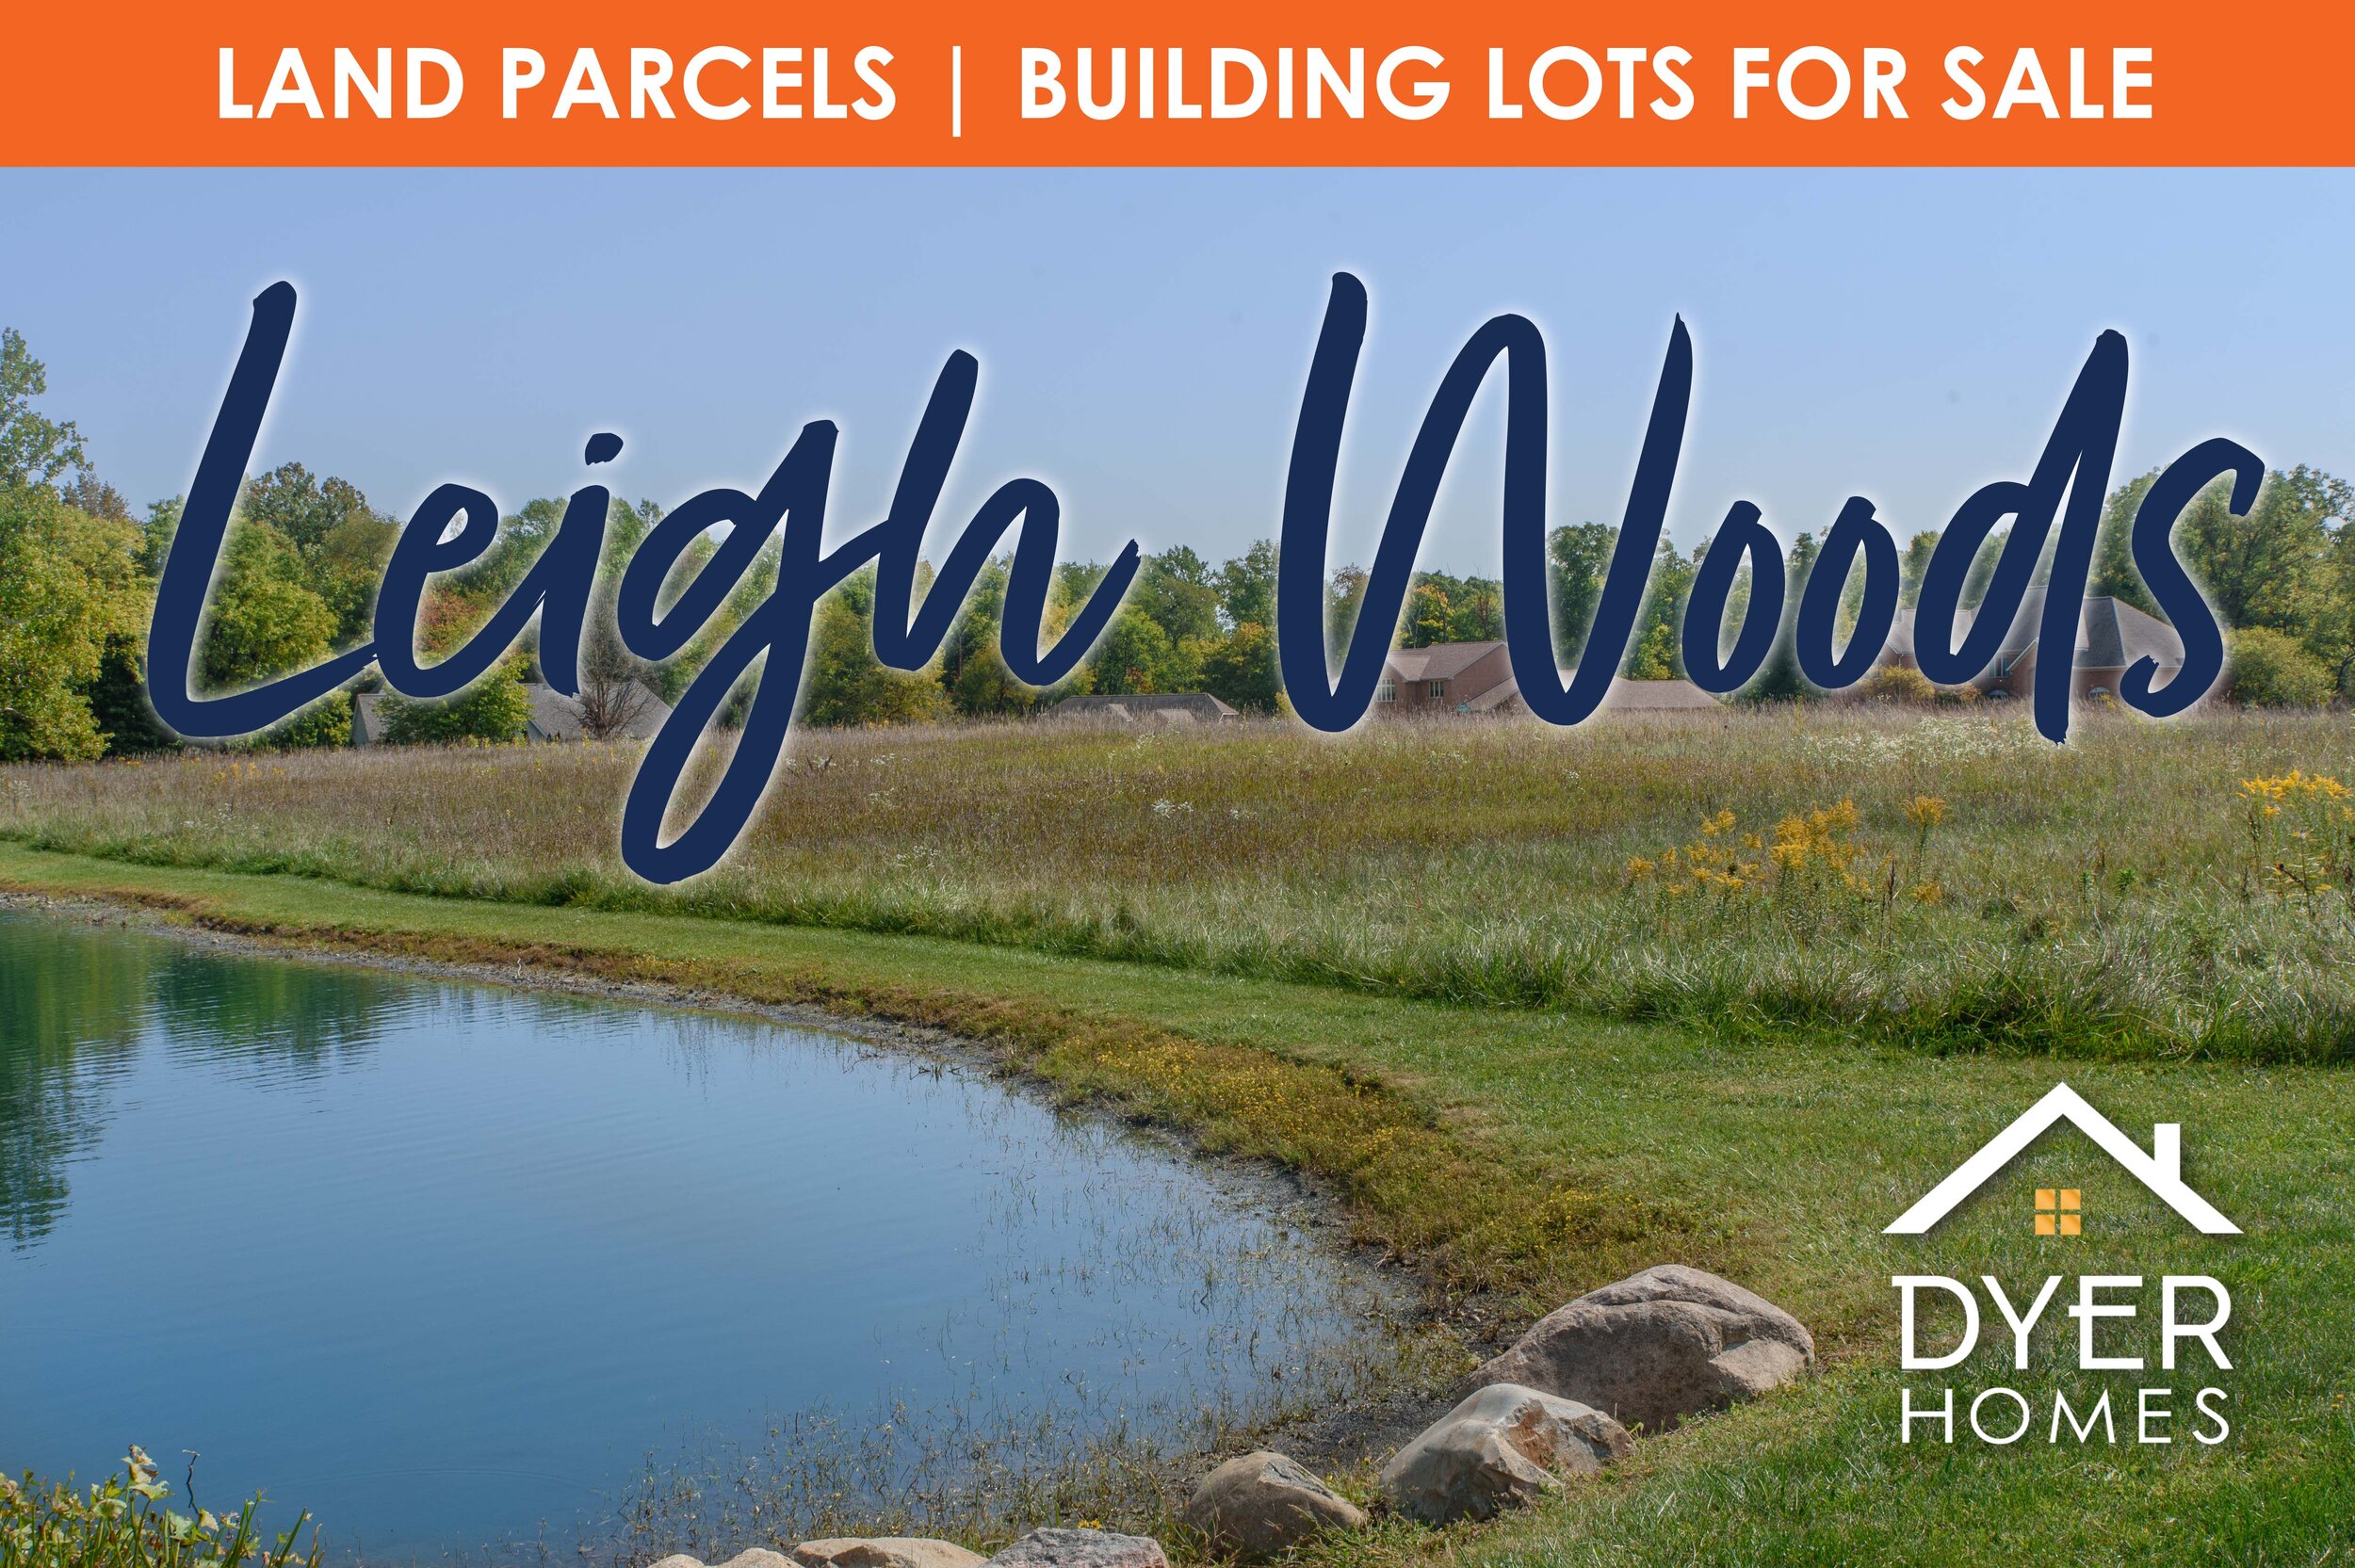 Leigh Woods Property for Sale